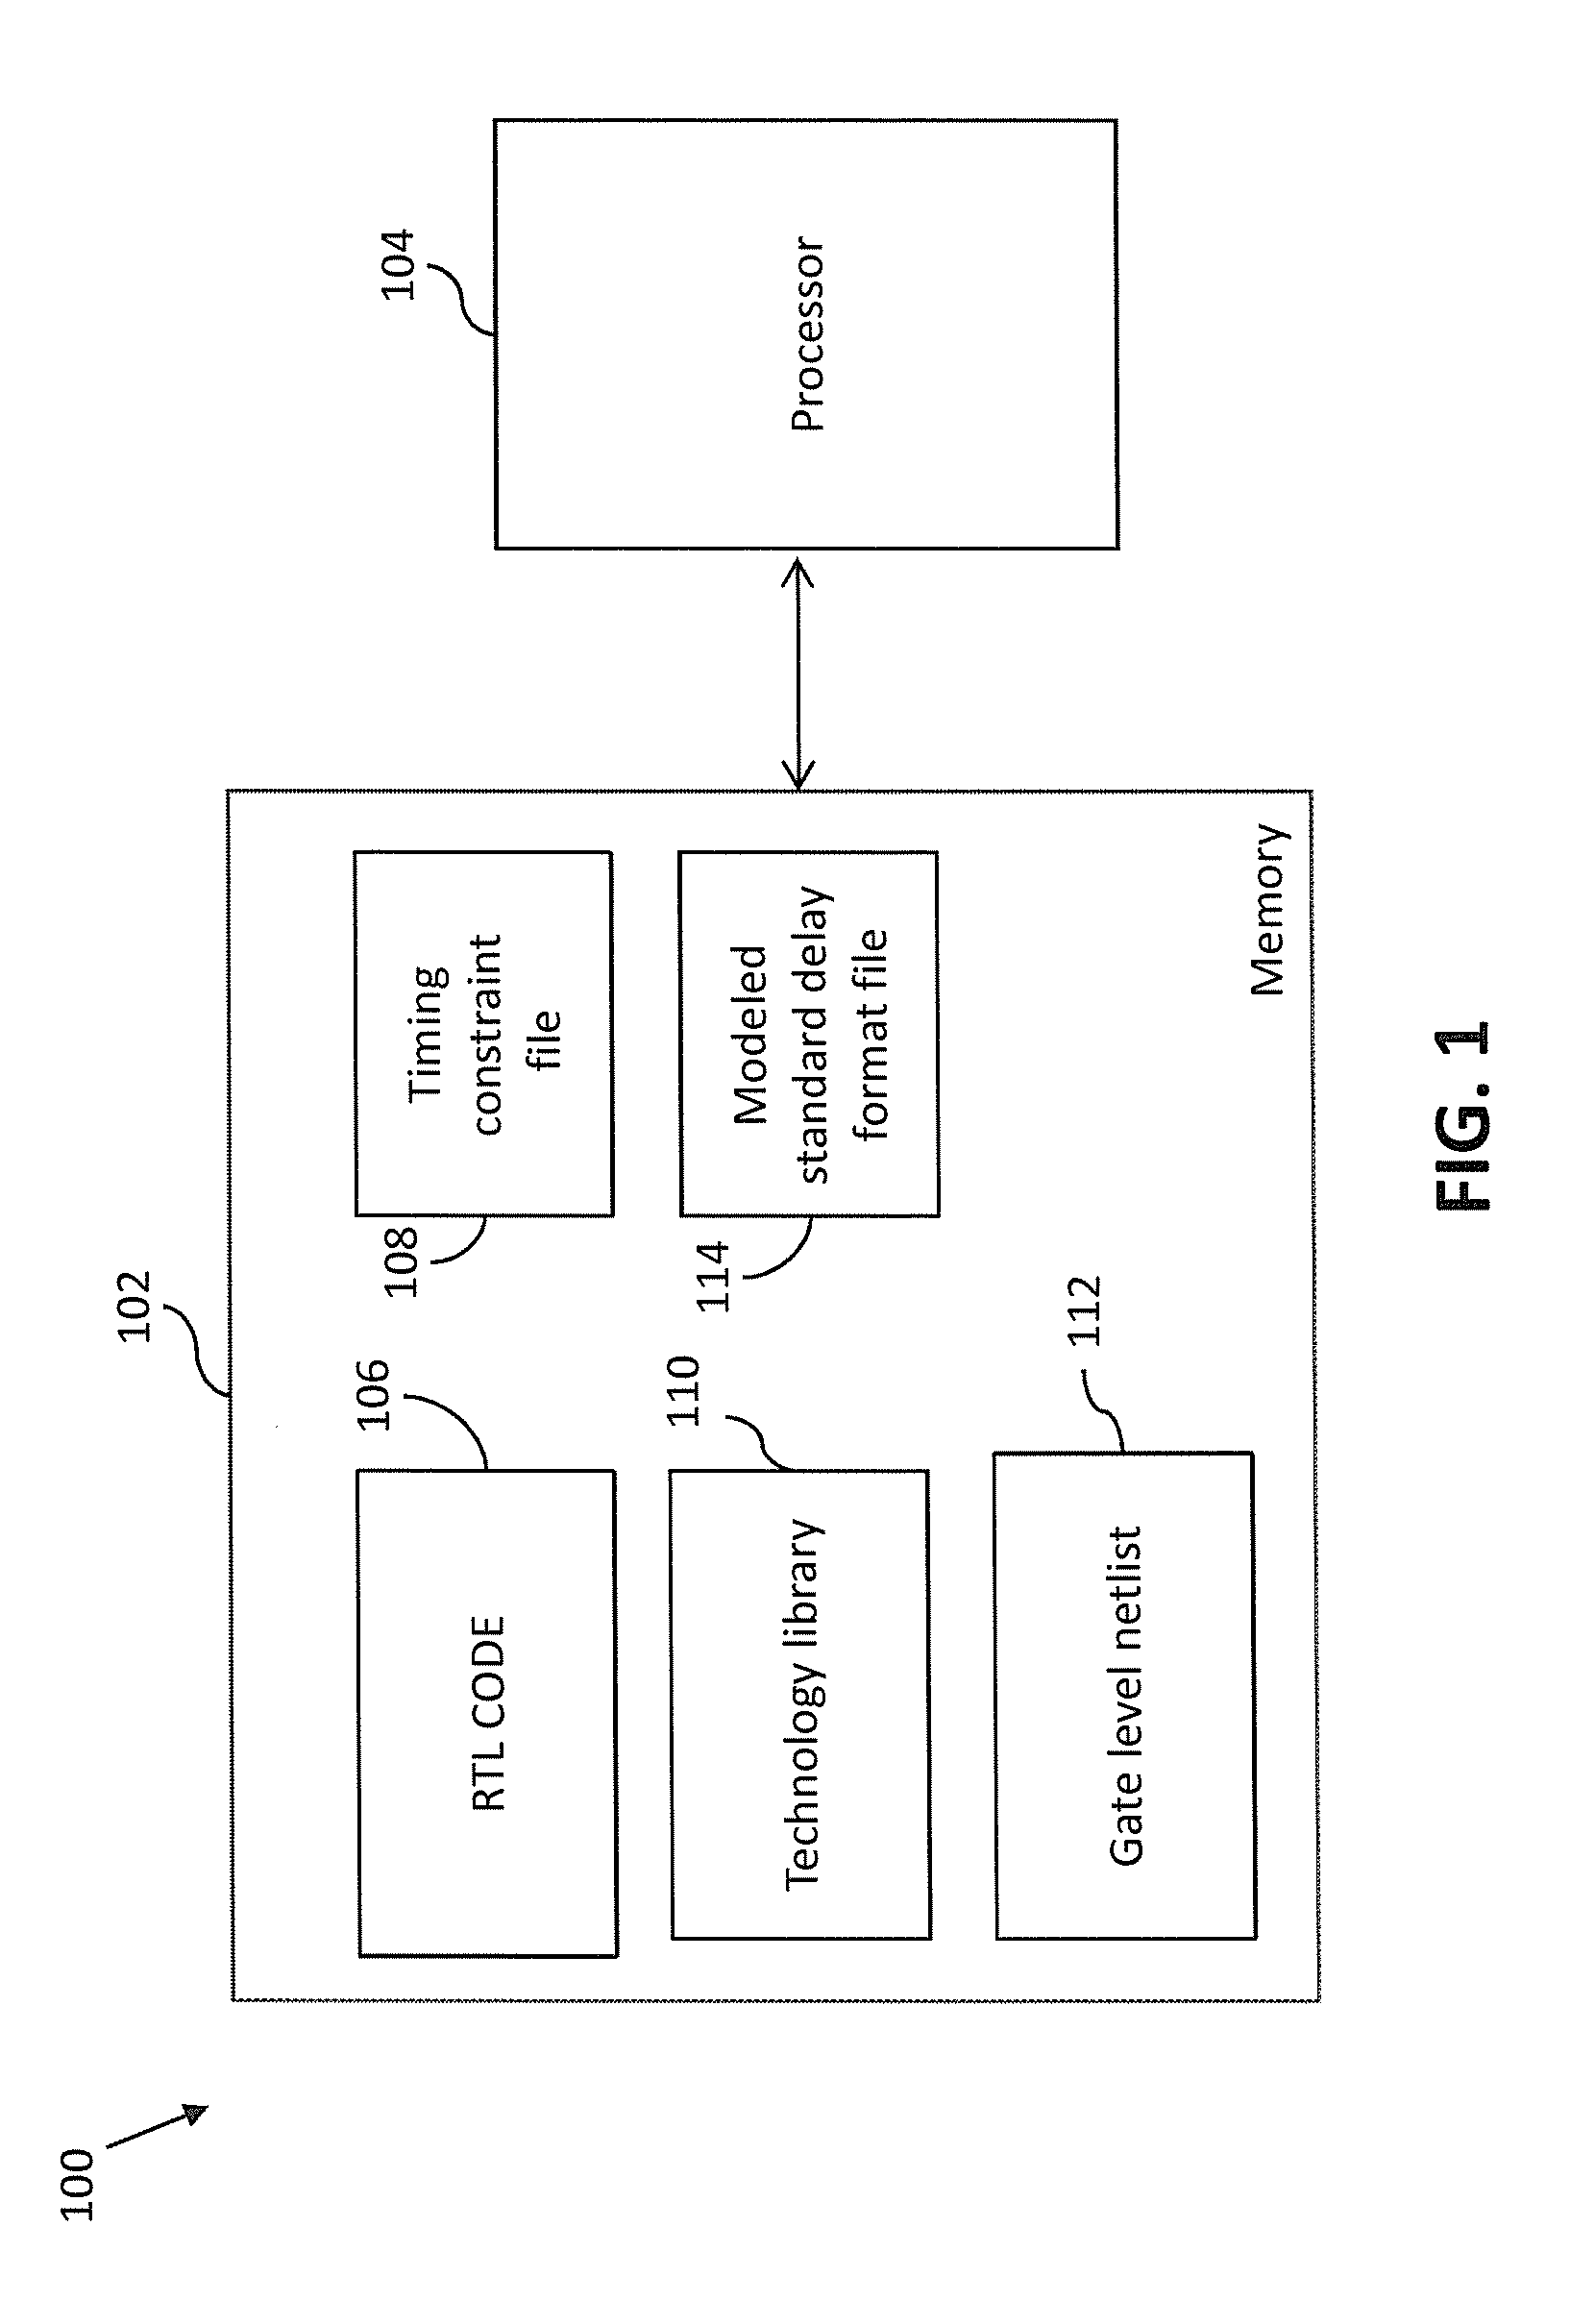 System for verifying timing constraints of IC design